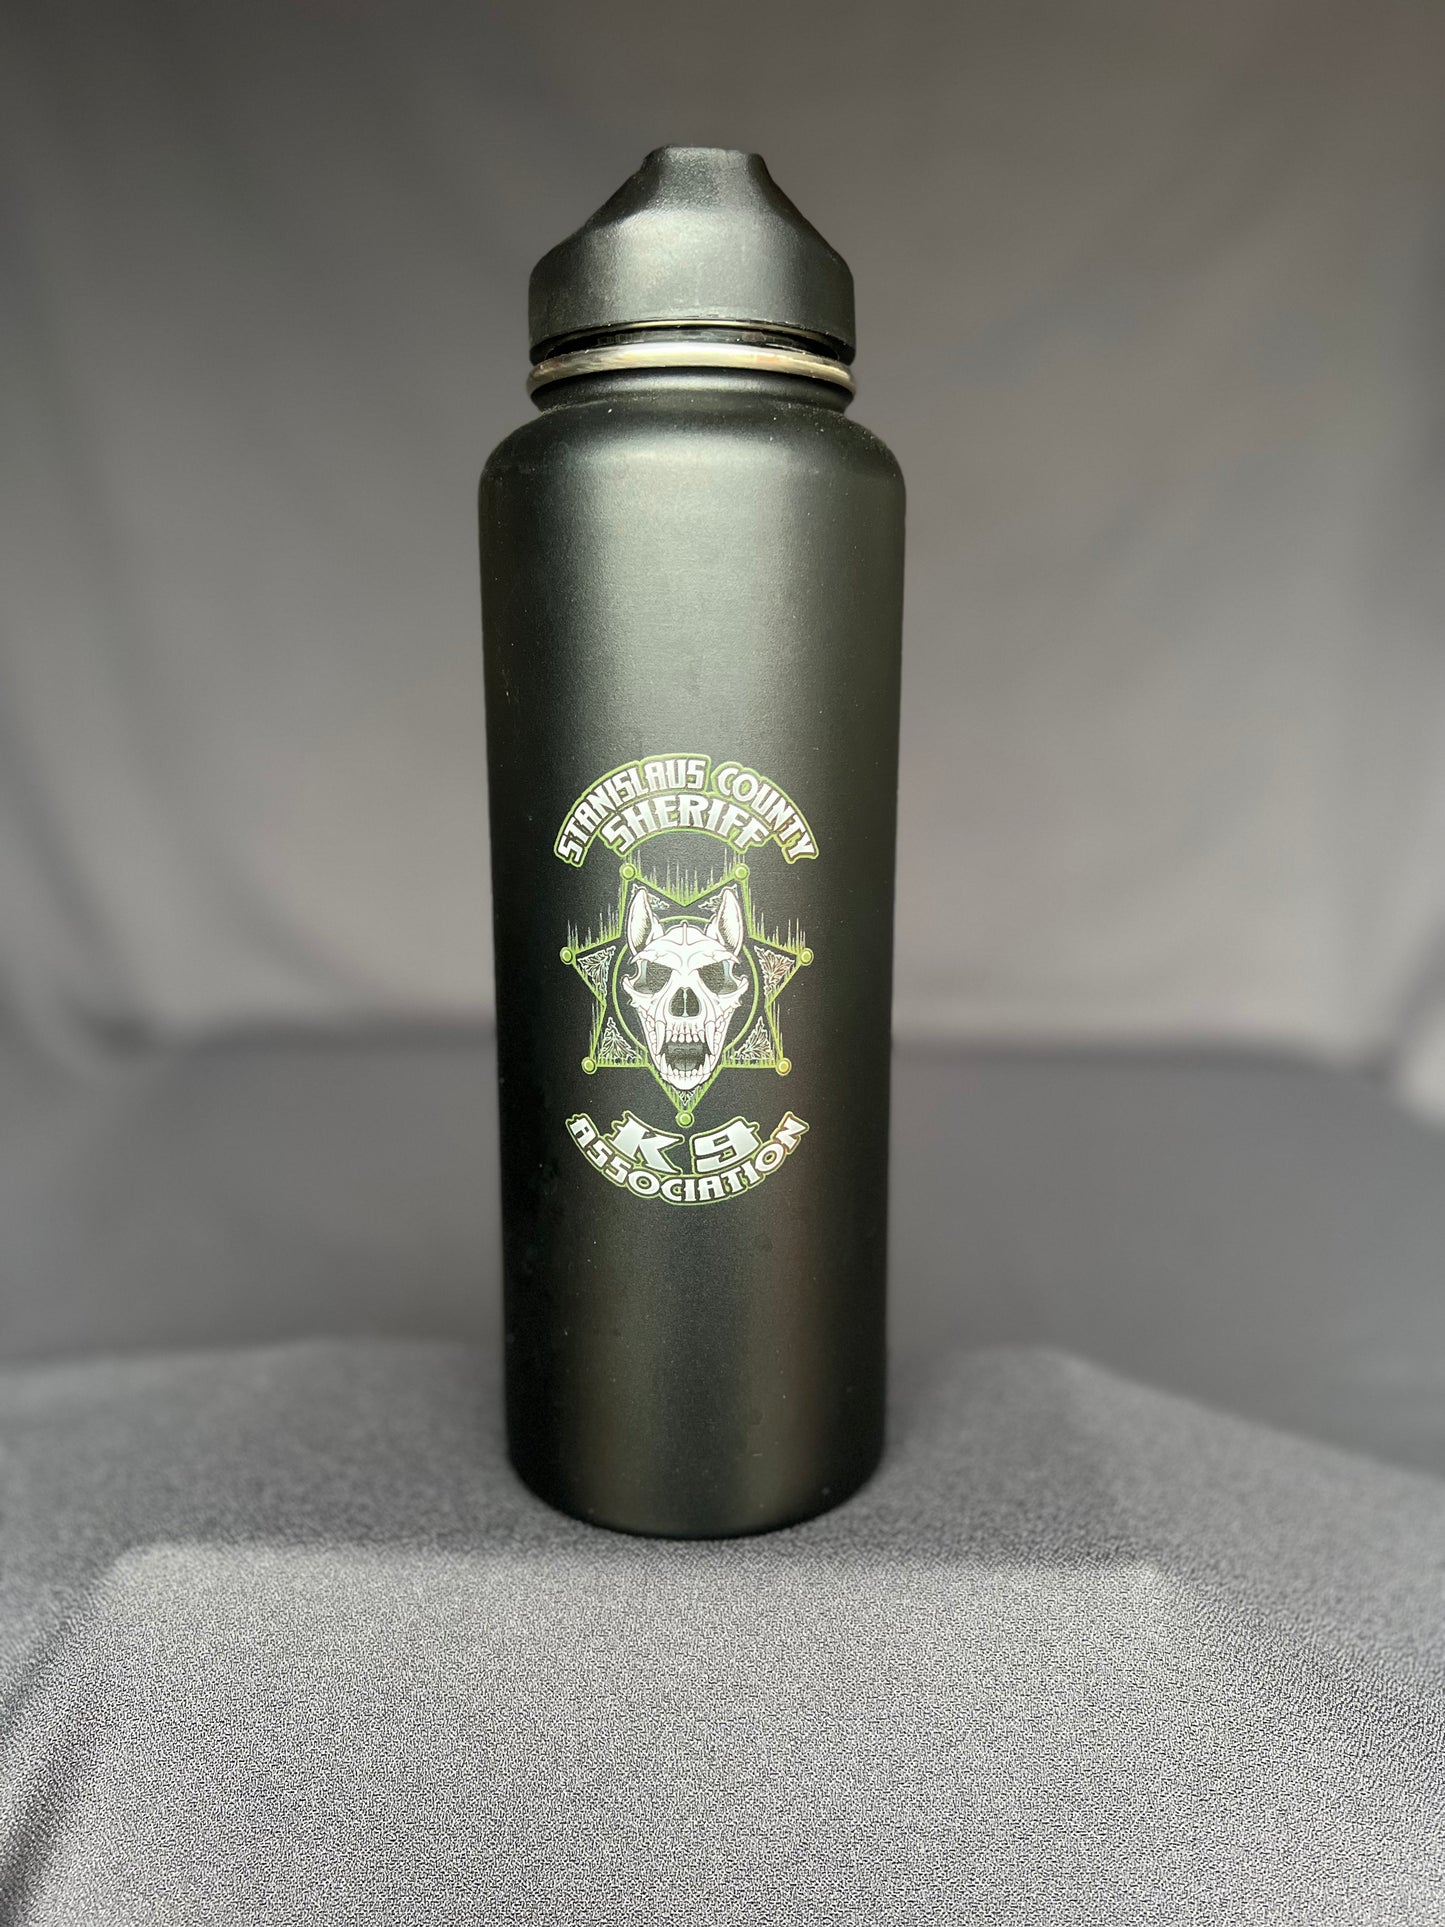 40oz Hydro Flask Water Bottle with Straw Lid Stainless Steel